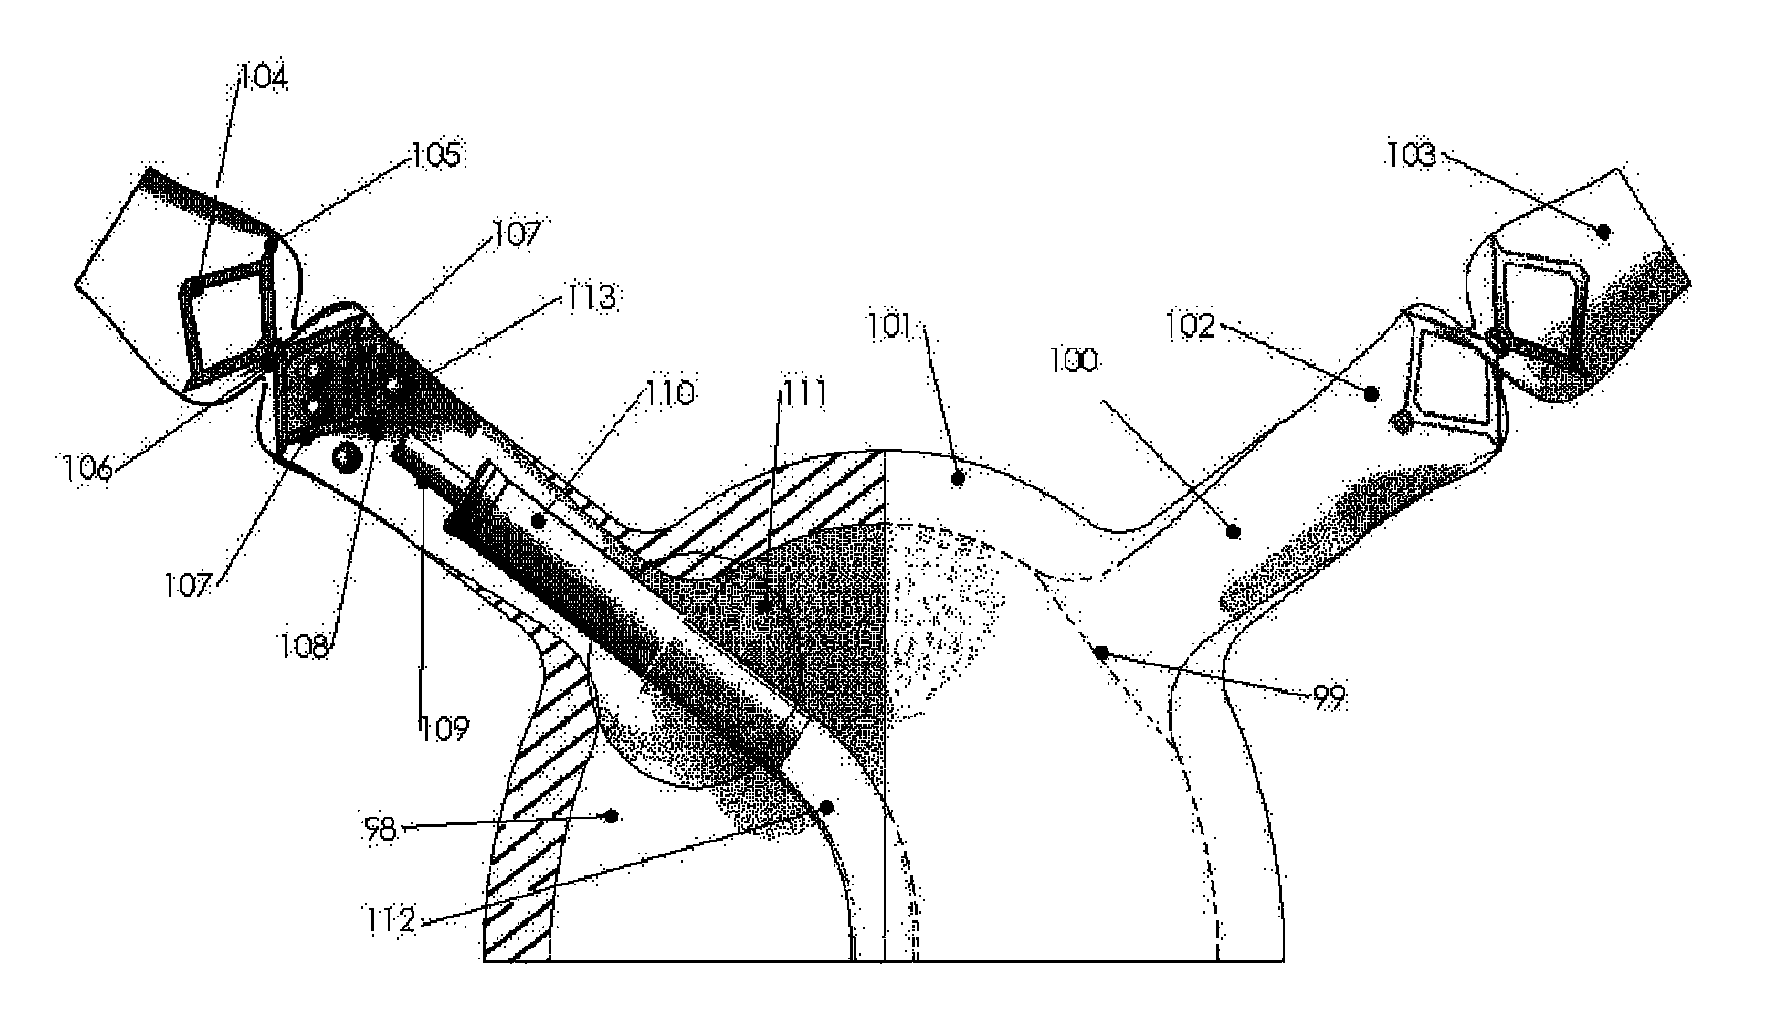 Methods and apparatus for occlusion of body lumens